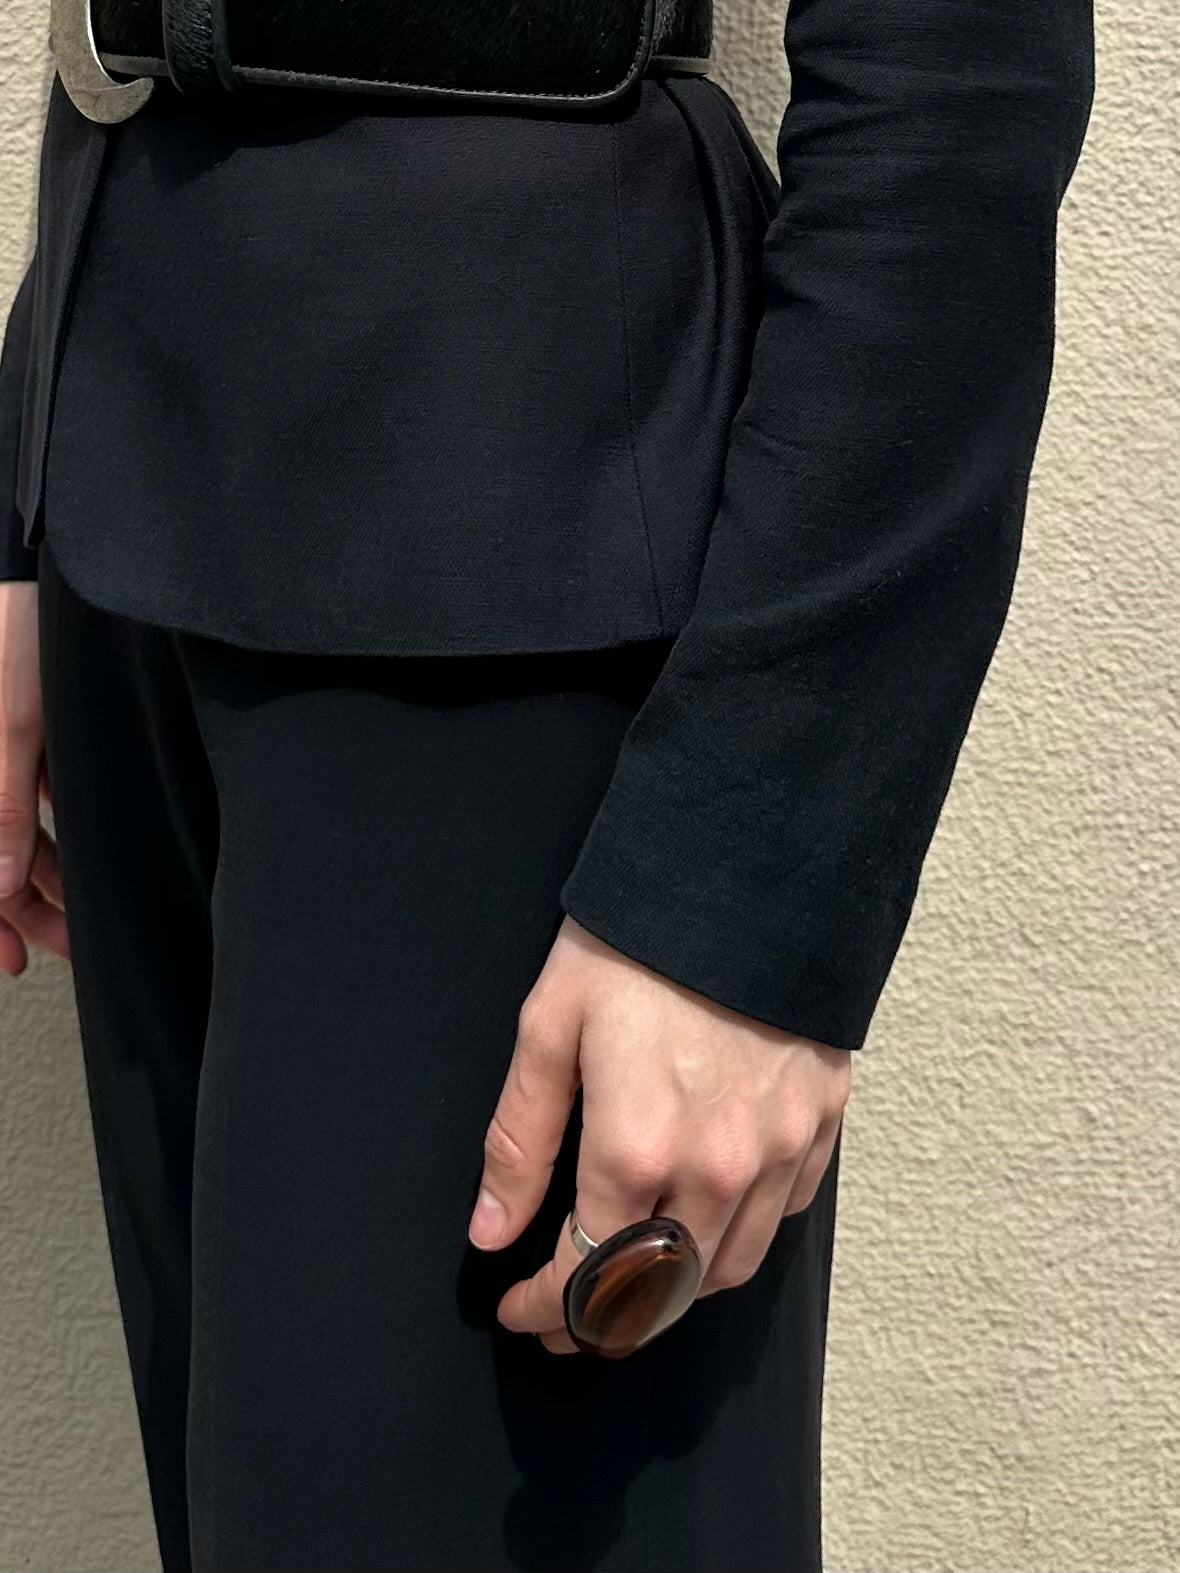 STATEMENT RING WITH PERSPECTIVE